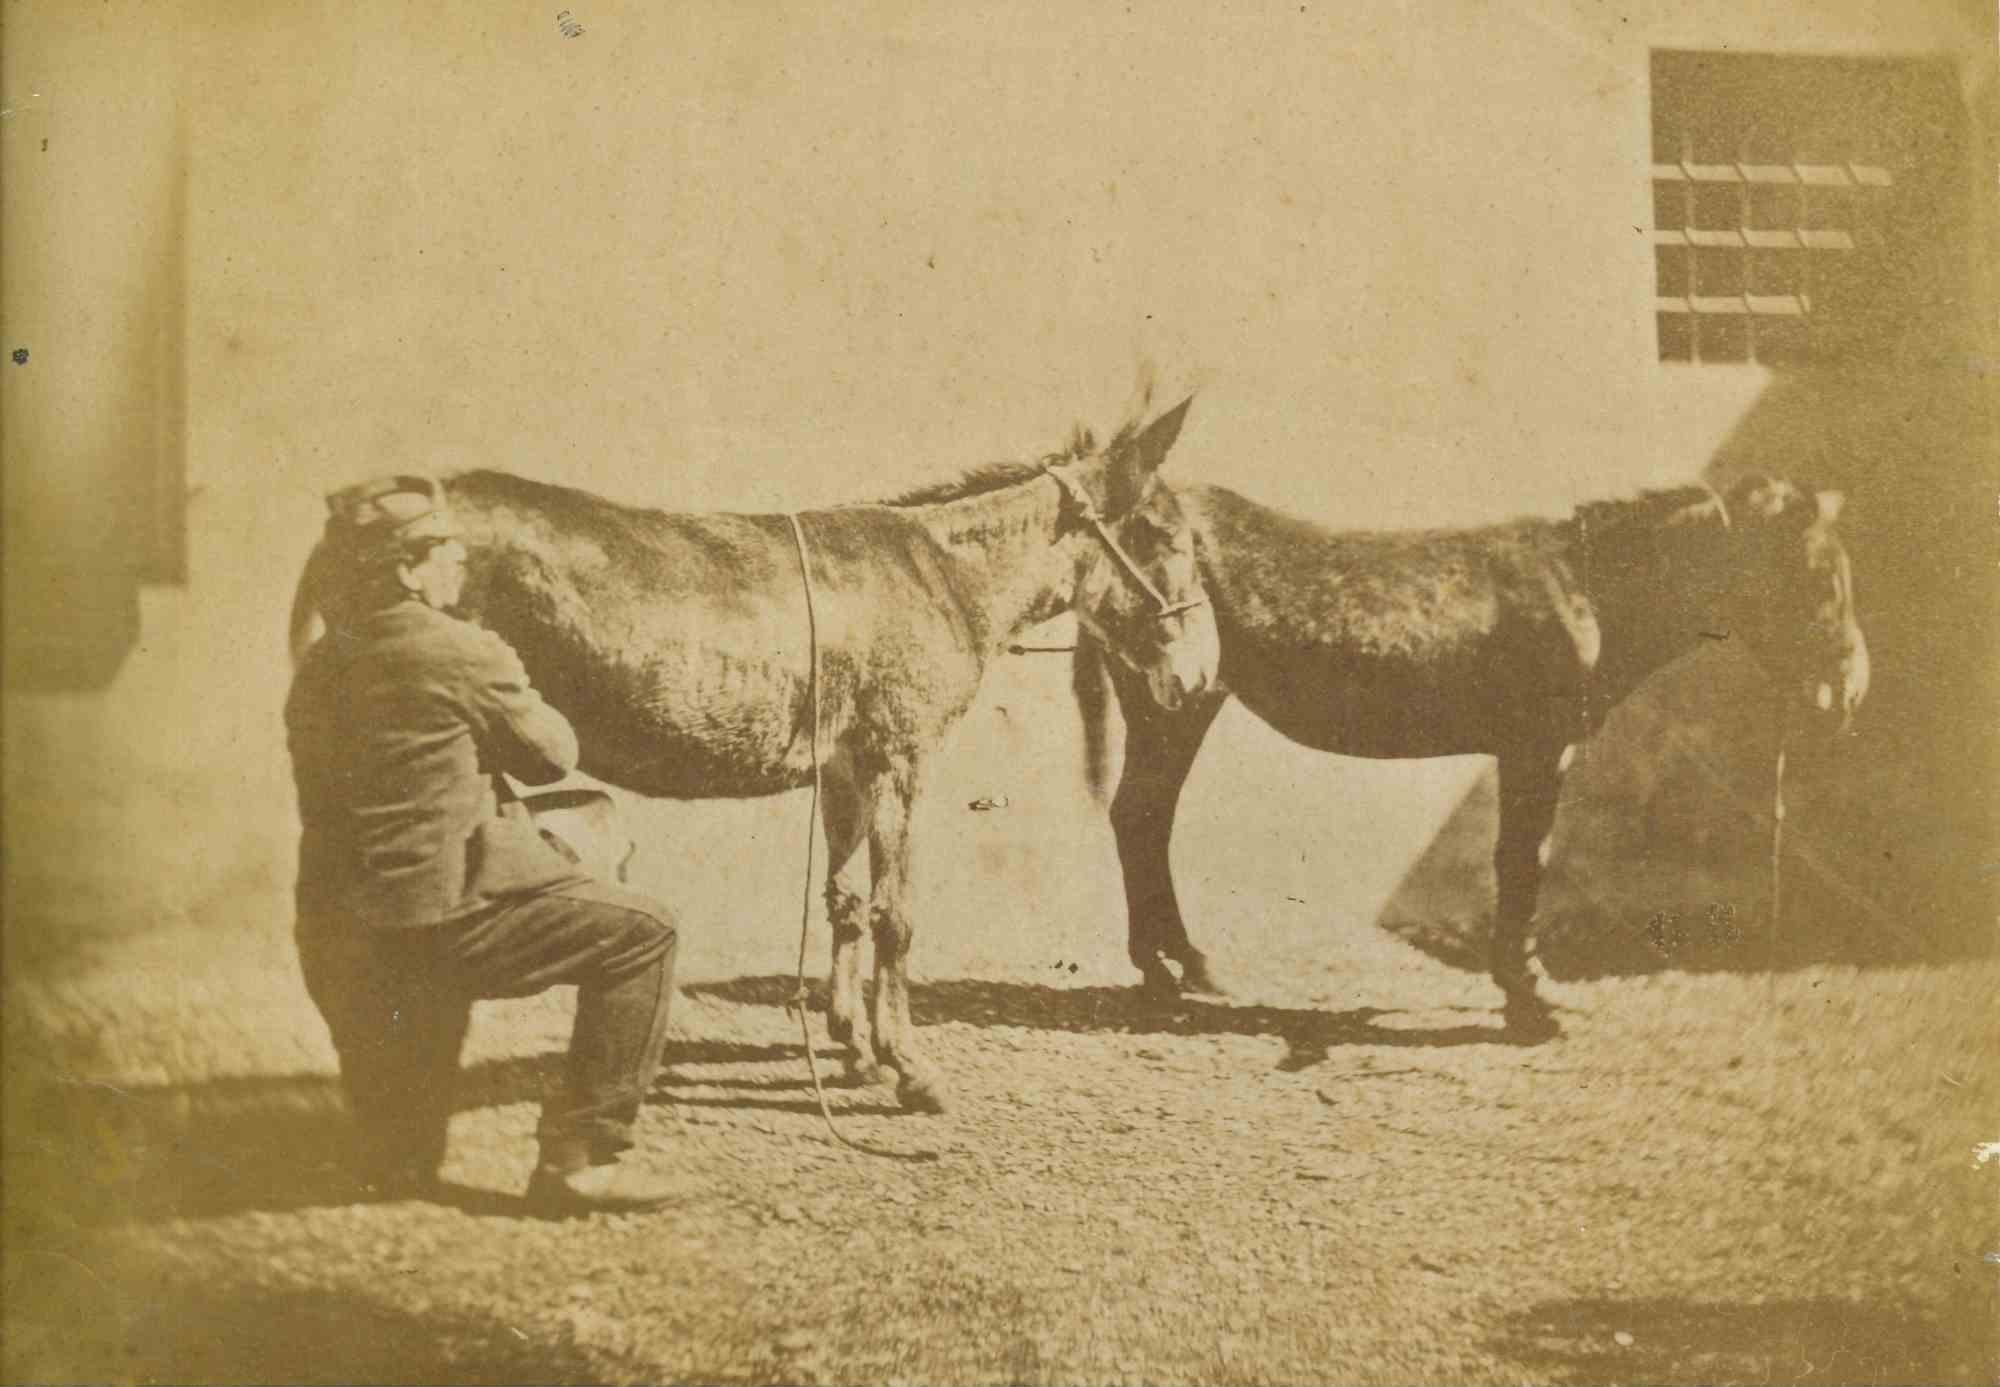 Unknown Figurative Photograph - The Old Days Photo - Animals - Vintage Photo - Early 20th Century